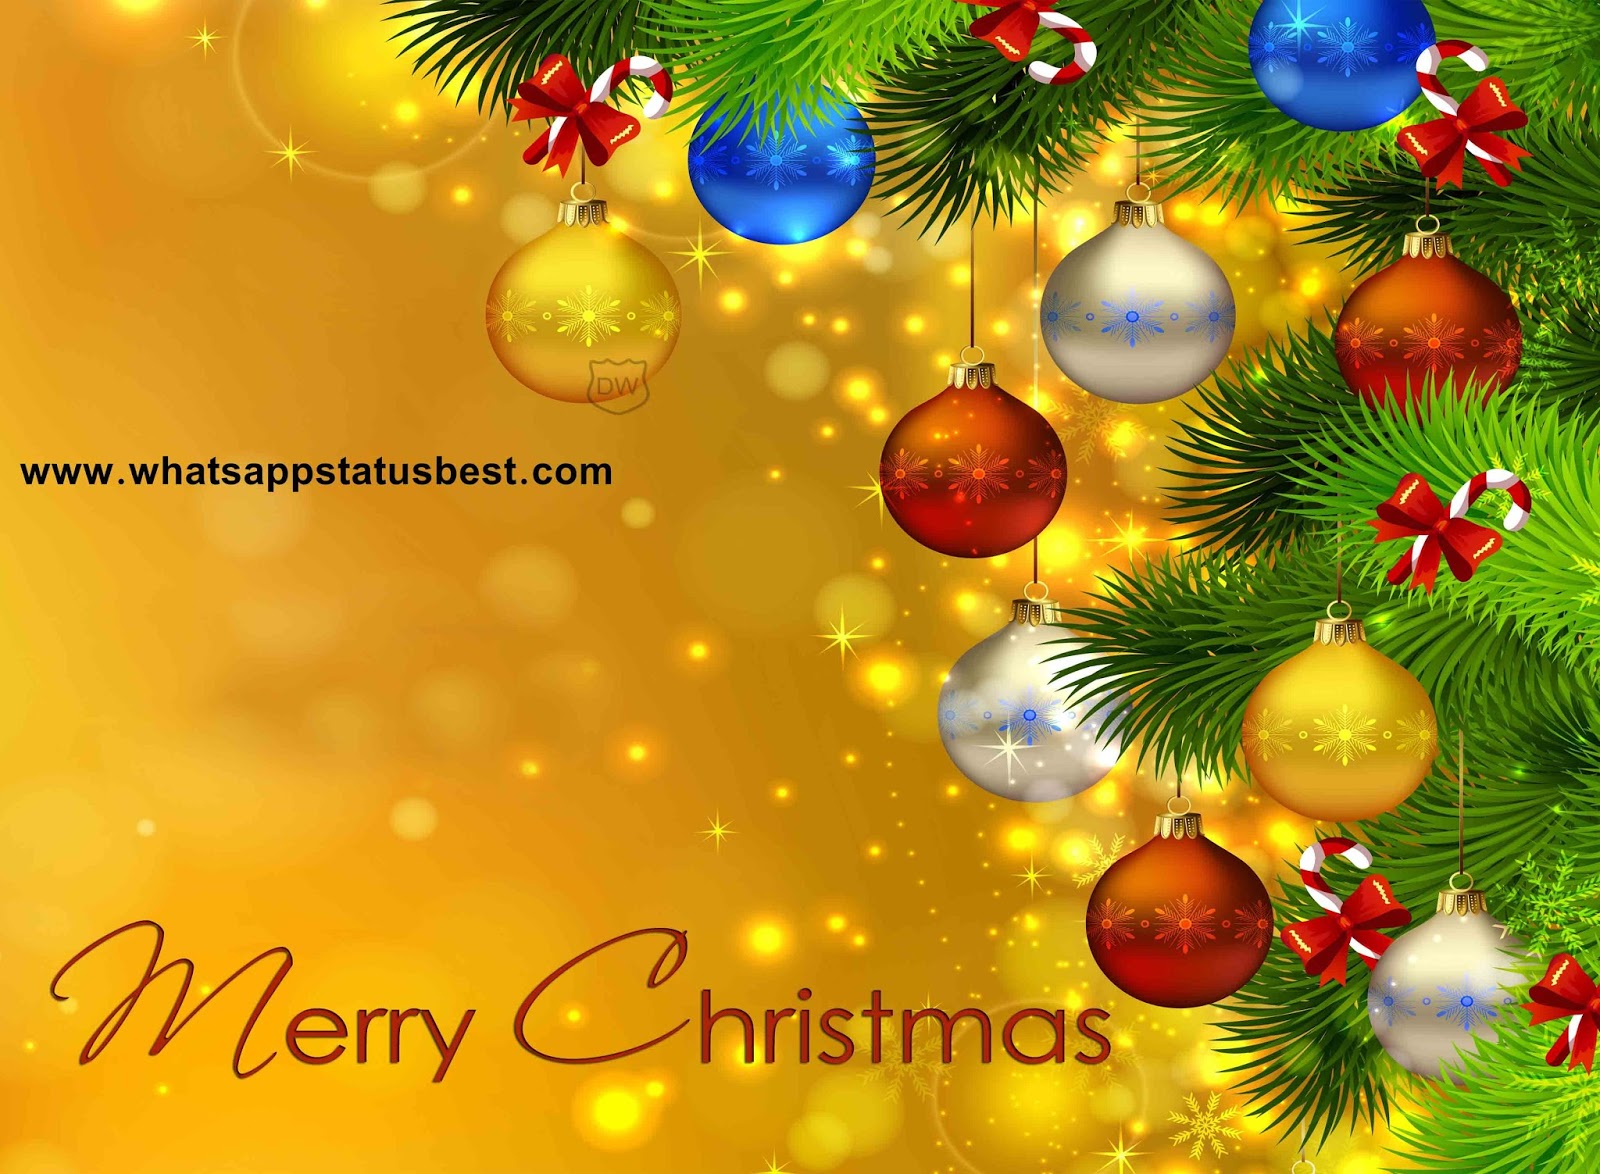 Bet Merry Christmas 2015 Wall Papers Free Download Christmas